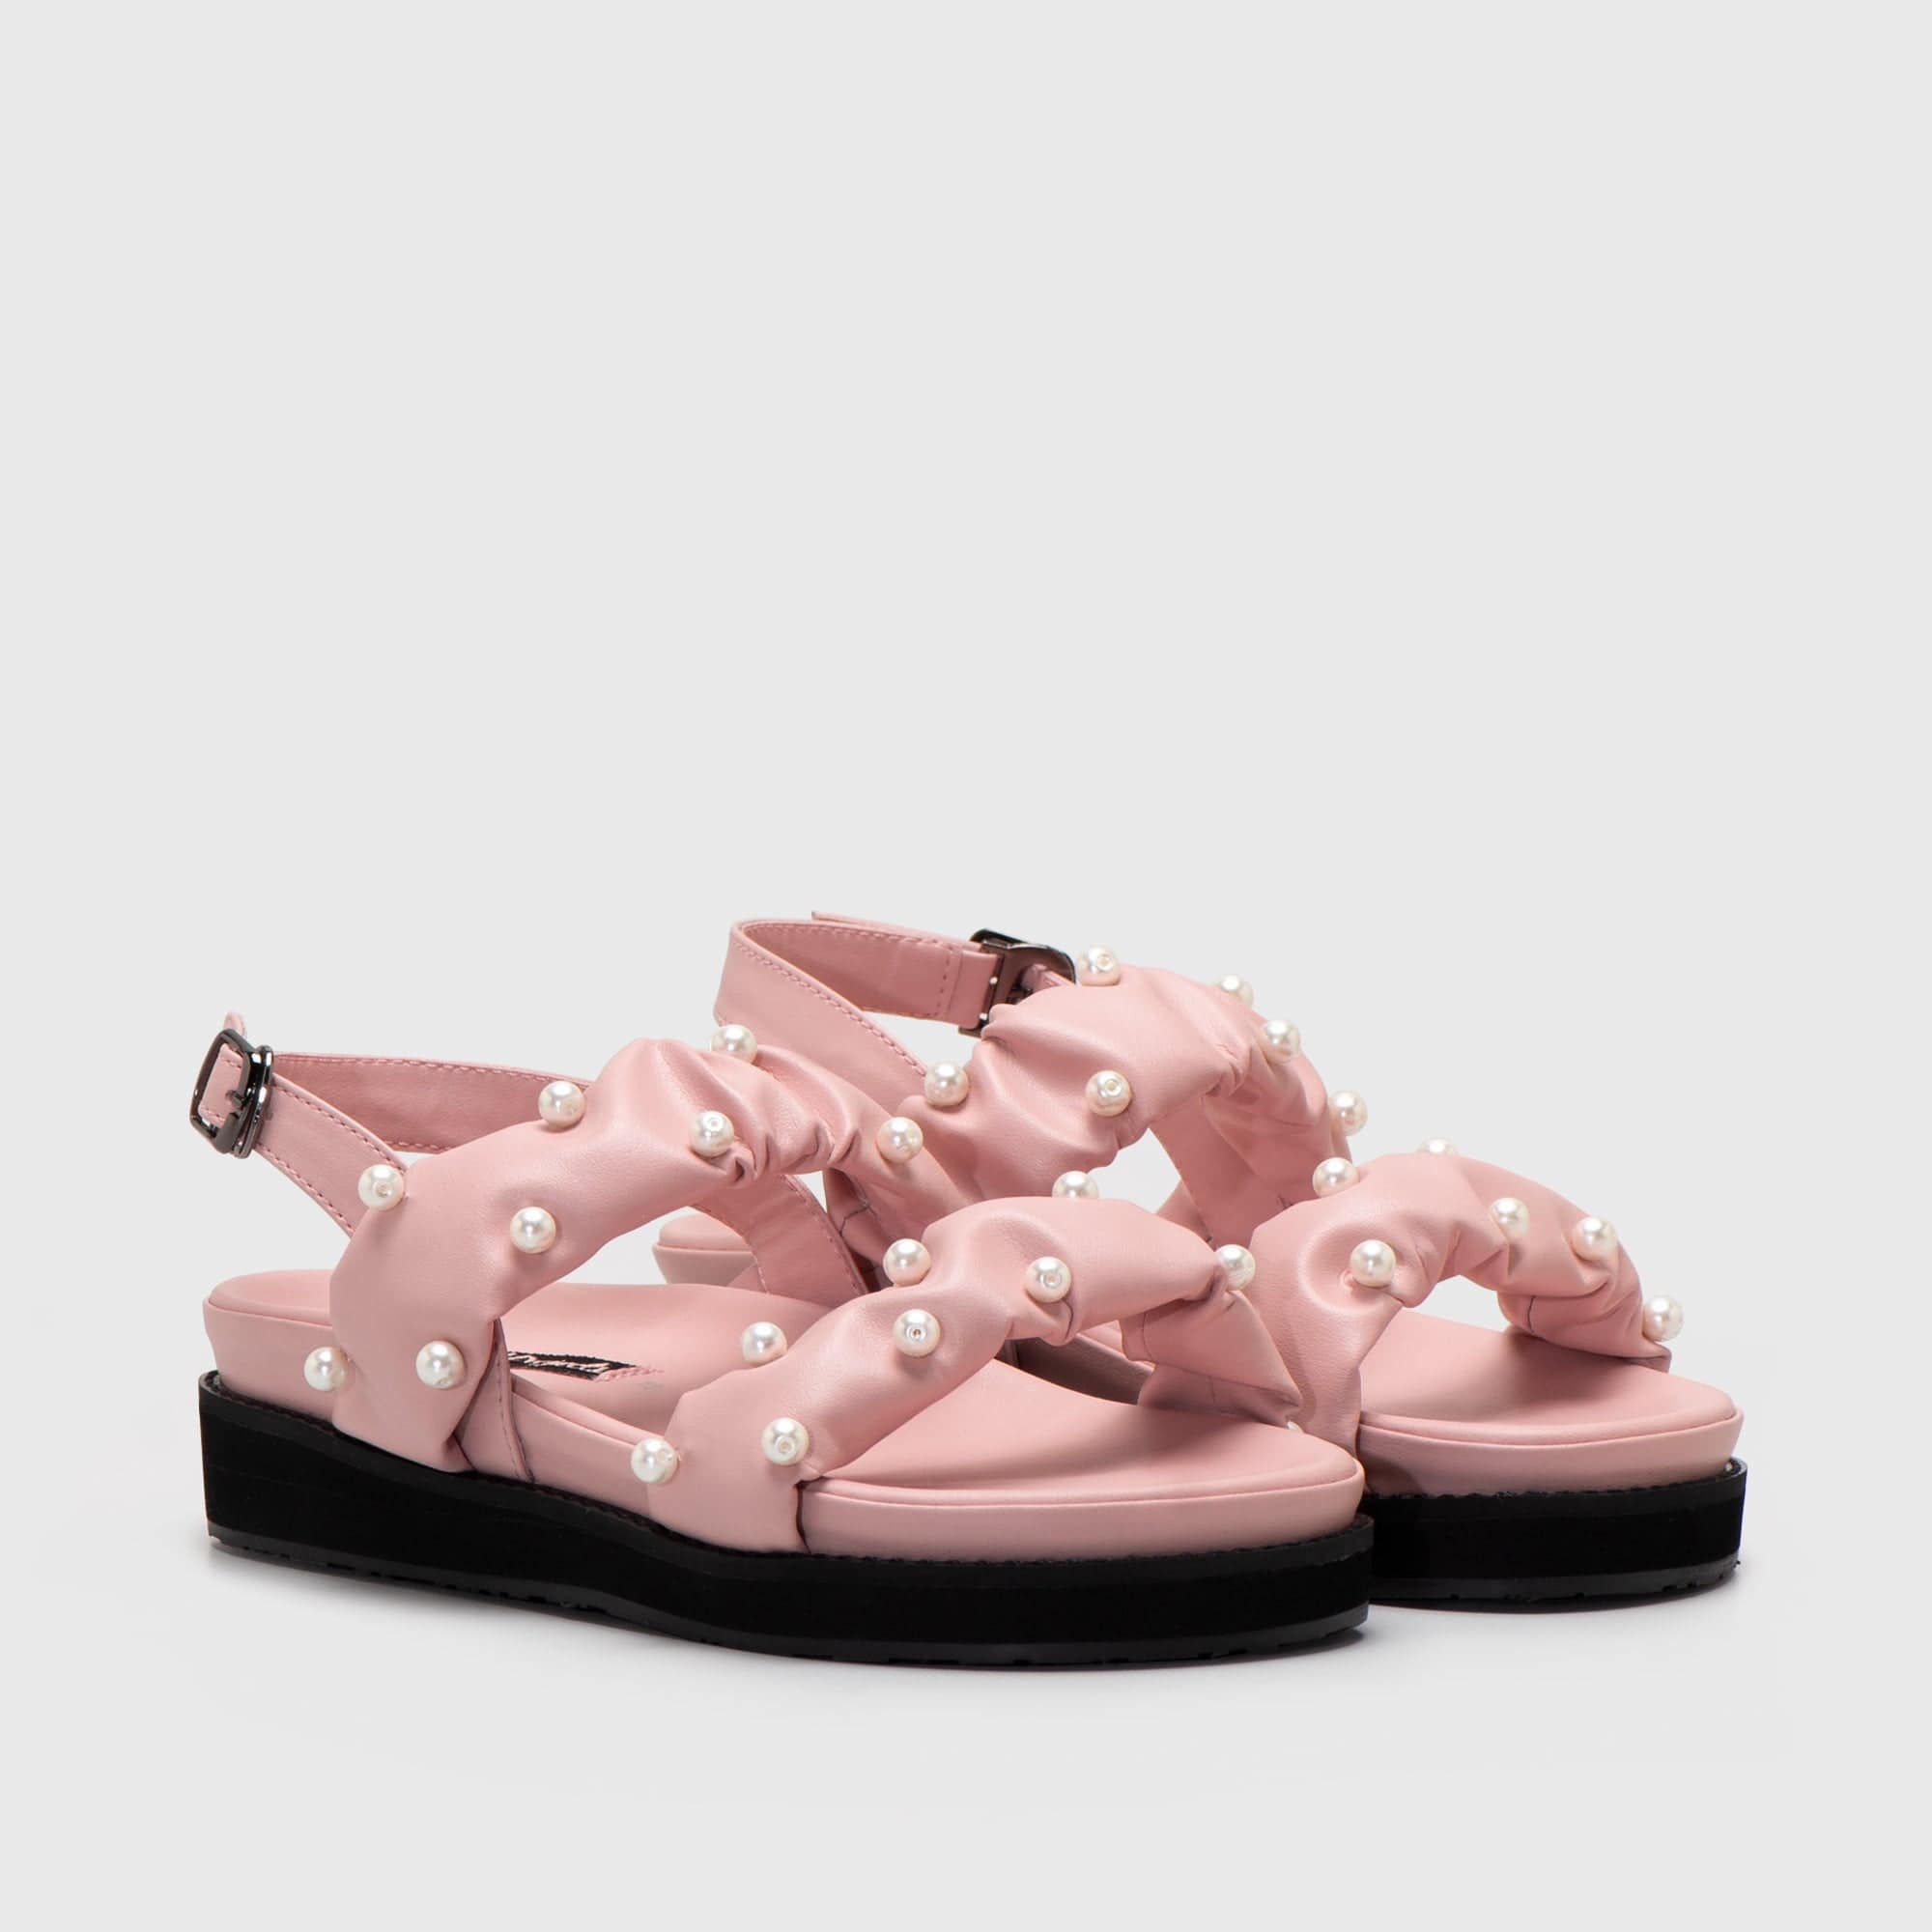 Adorable Projects Official 36 Parinda Sandals Pink